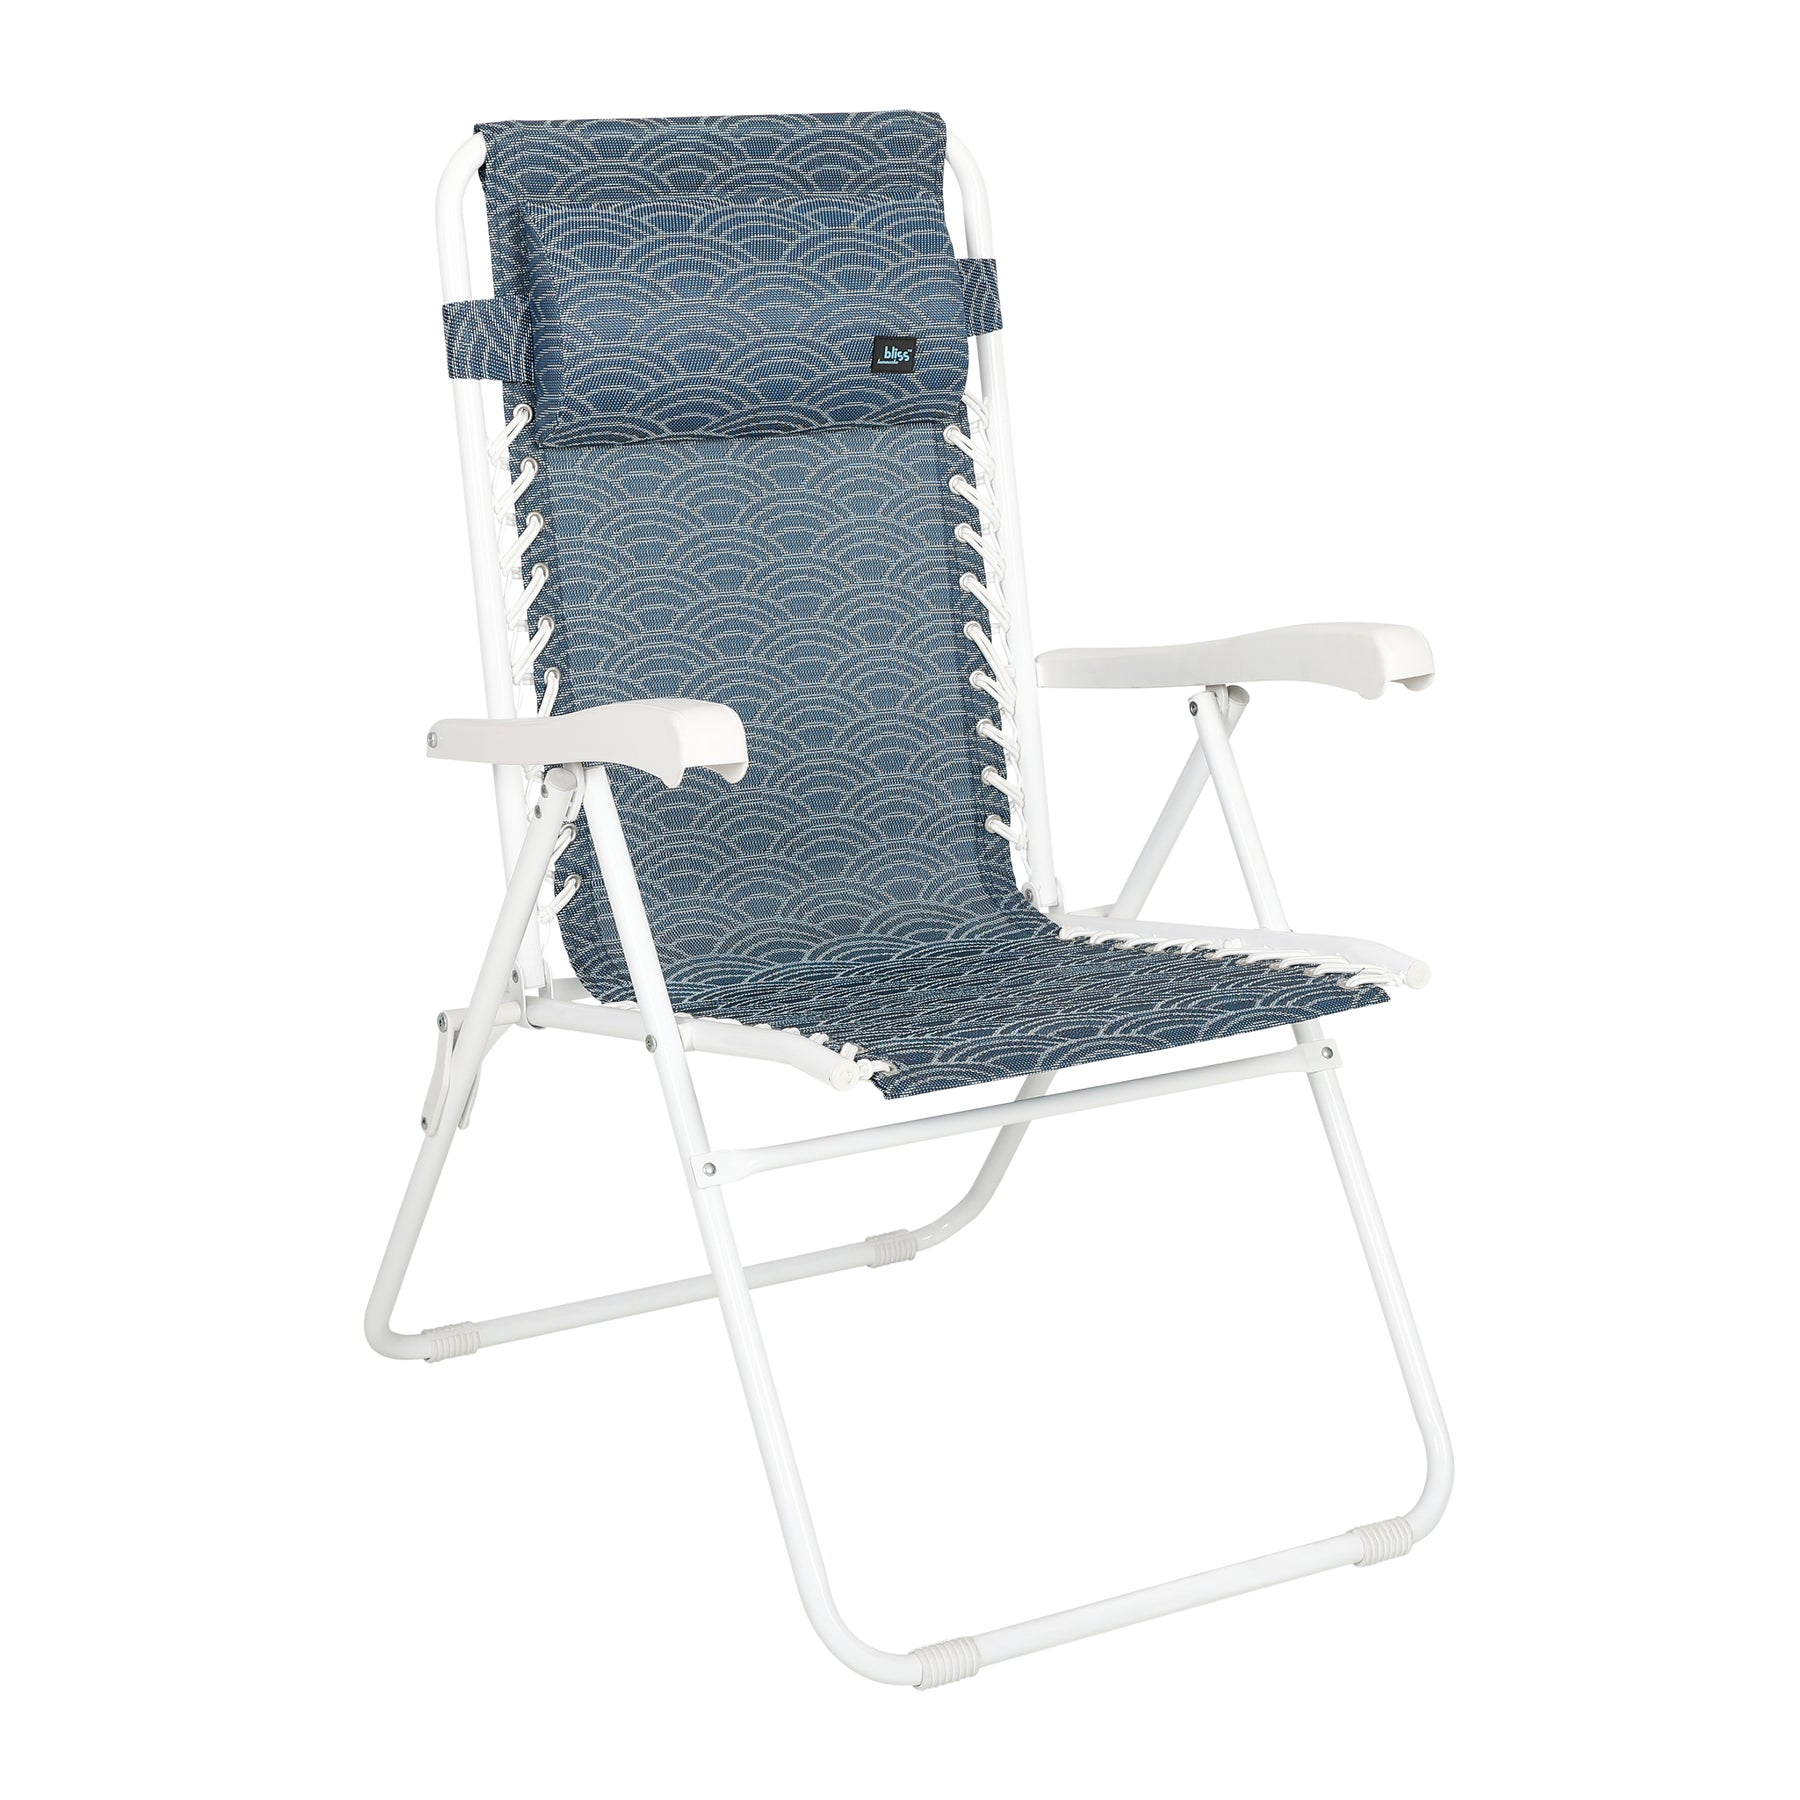 Bliss Hammocks 26-inch Wide Reclining Sling Chair with Pillow in the blue scallop variation: a navy blue color with a white scallop pattern.